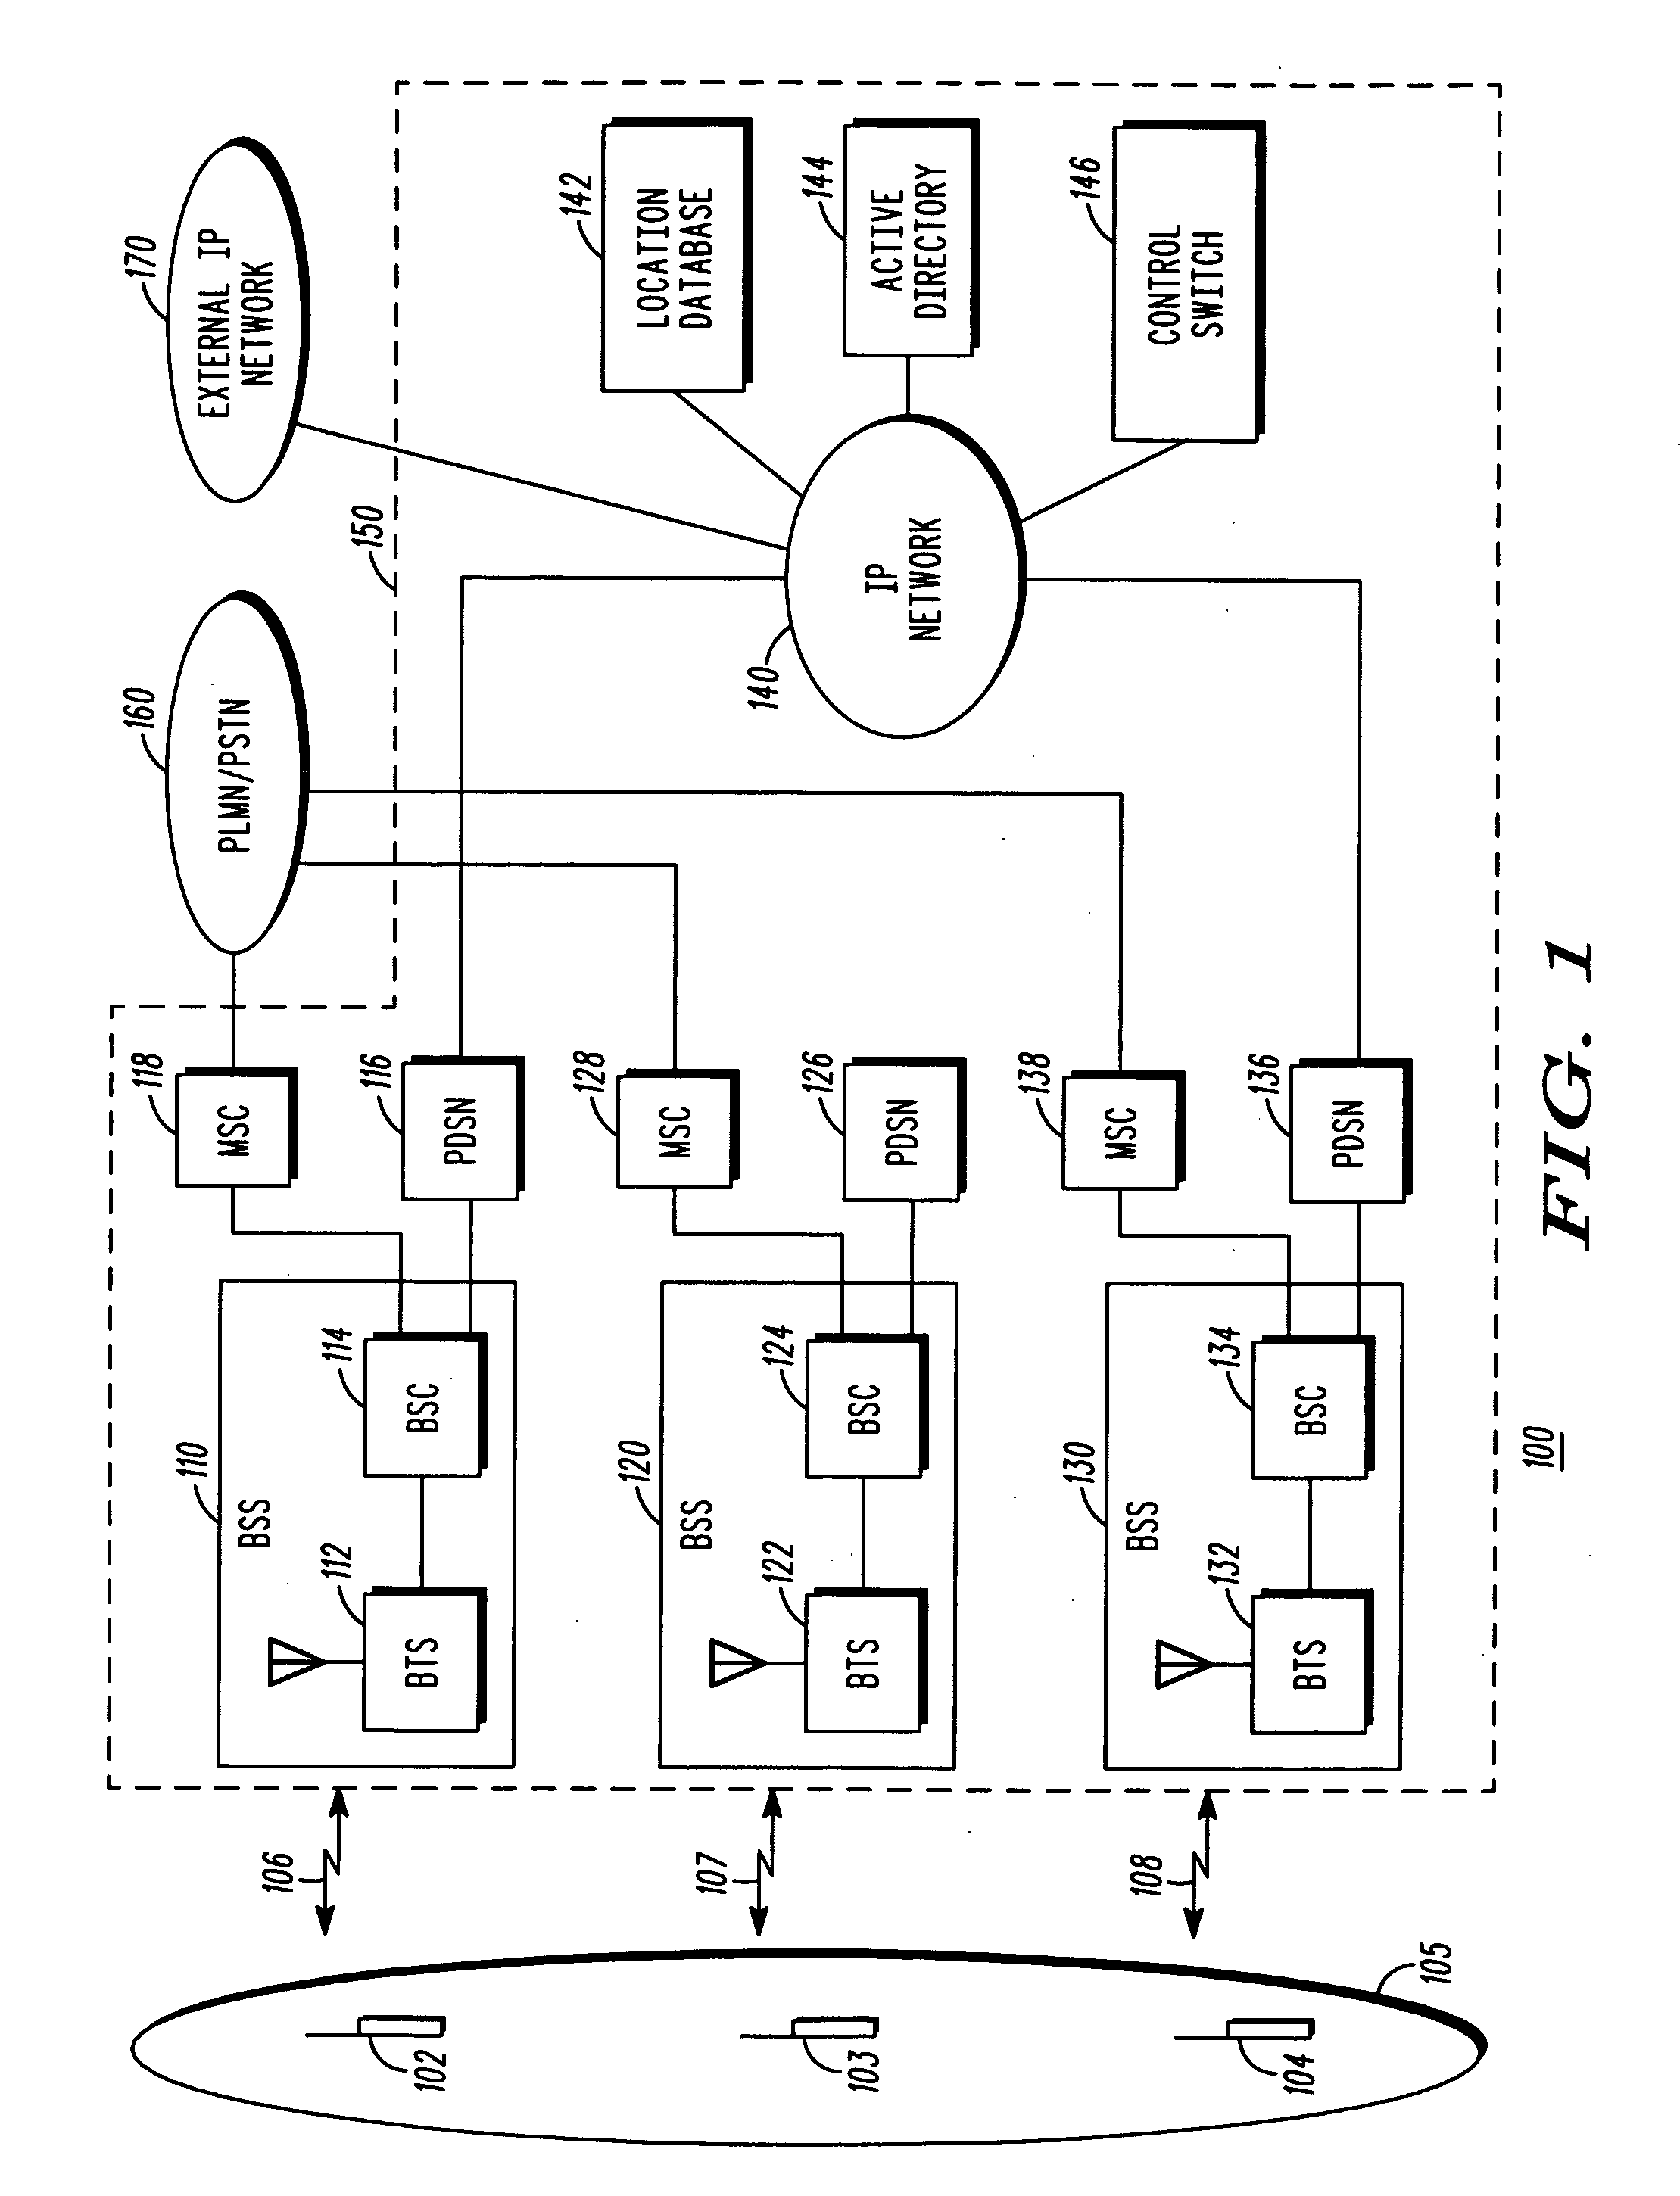 Method and apparatus for providing push-to-talk services in a cellular communication system